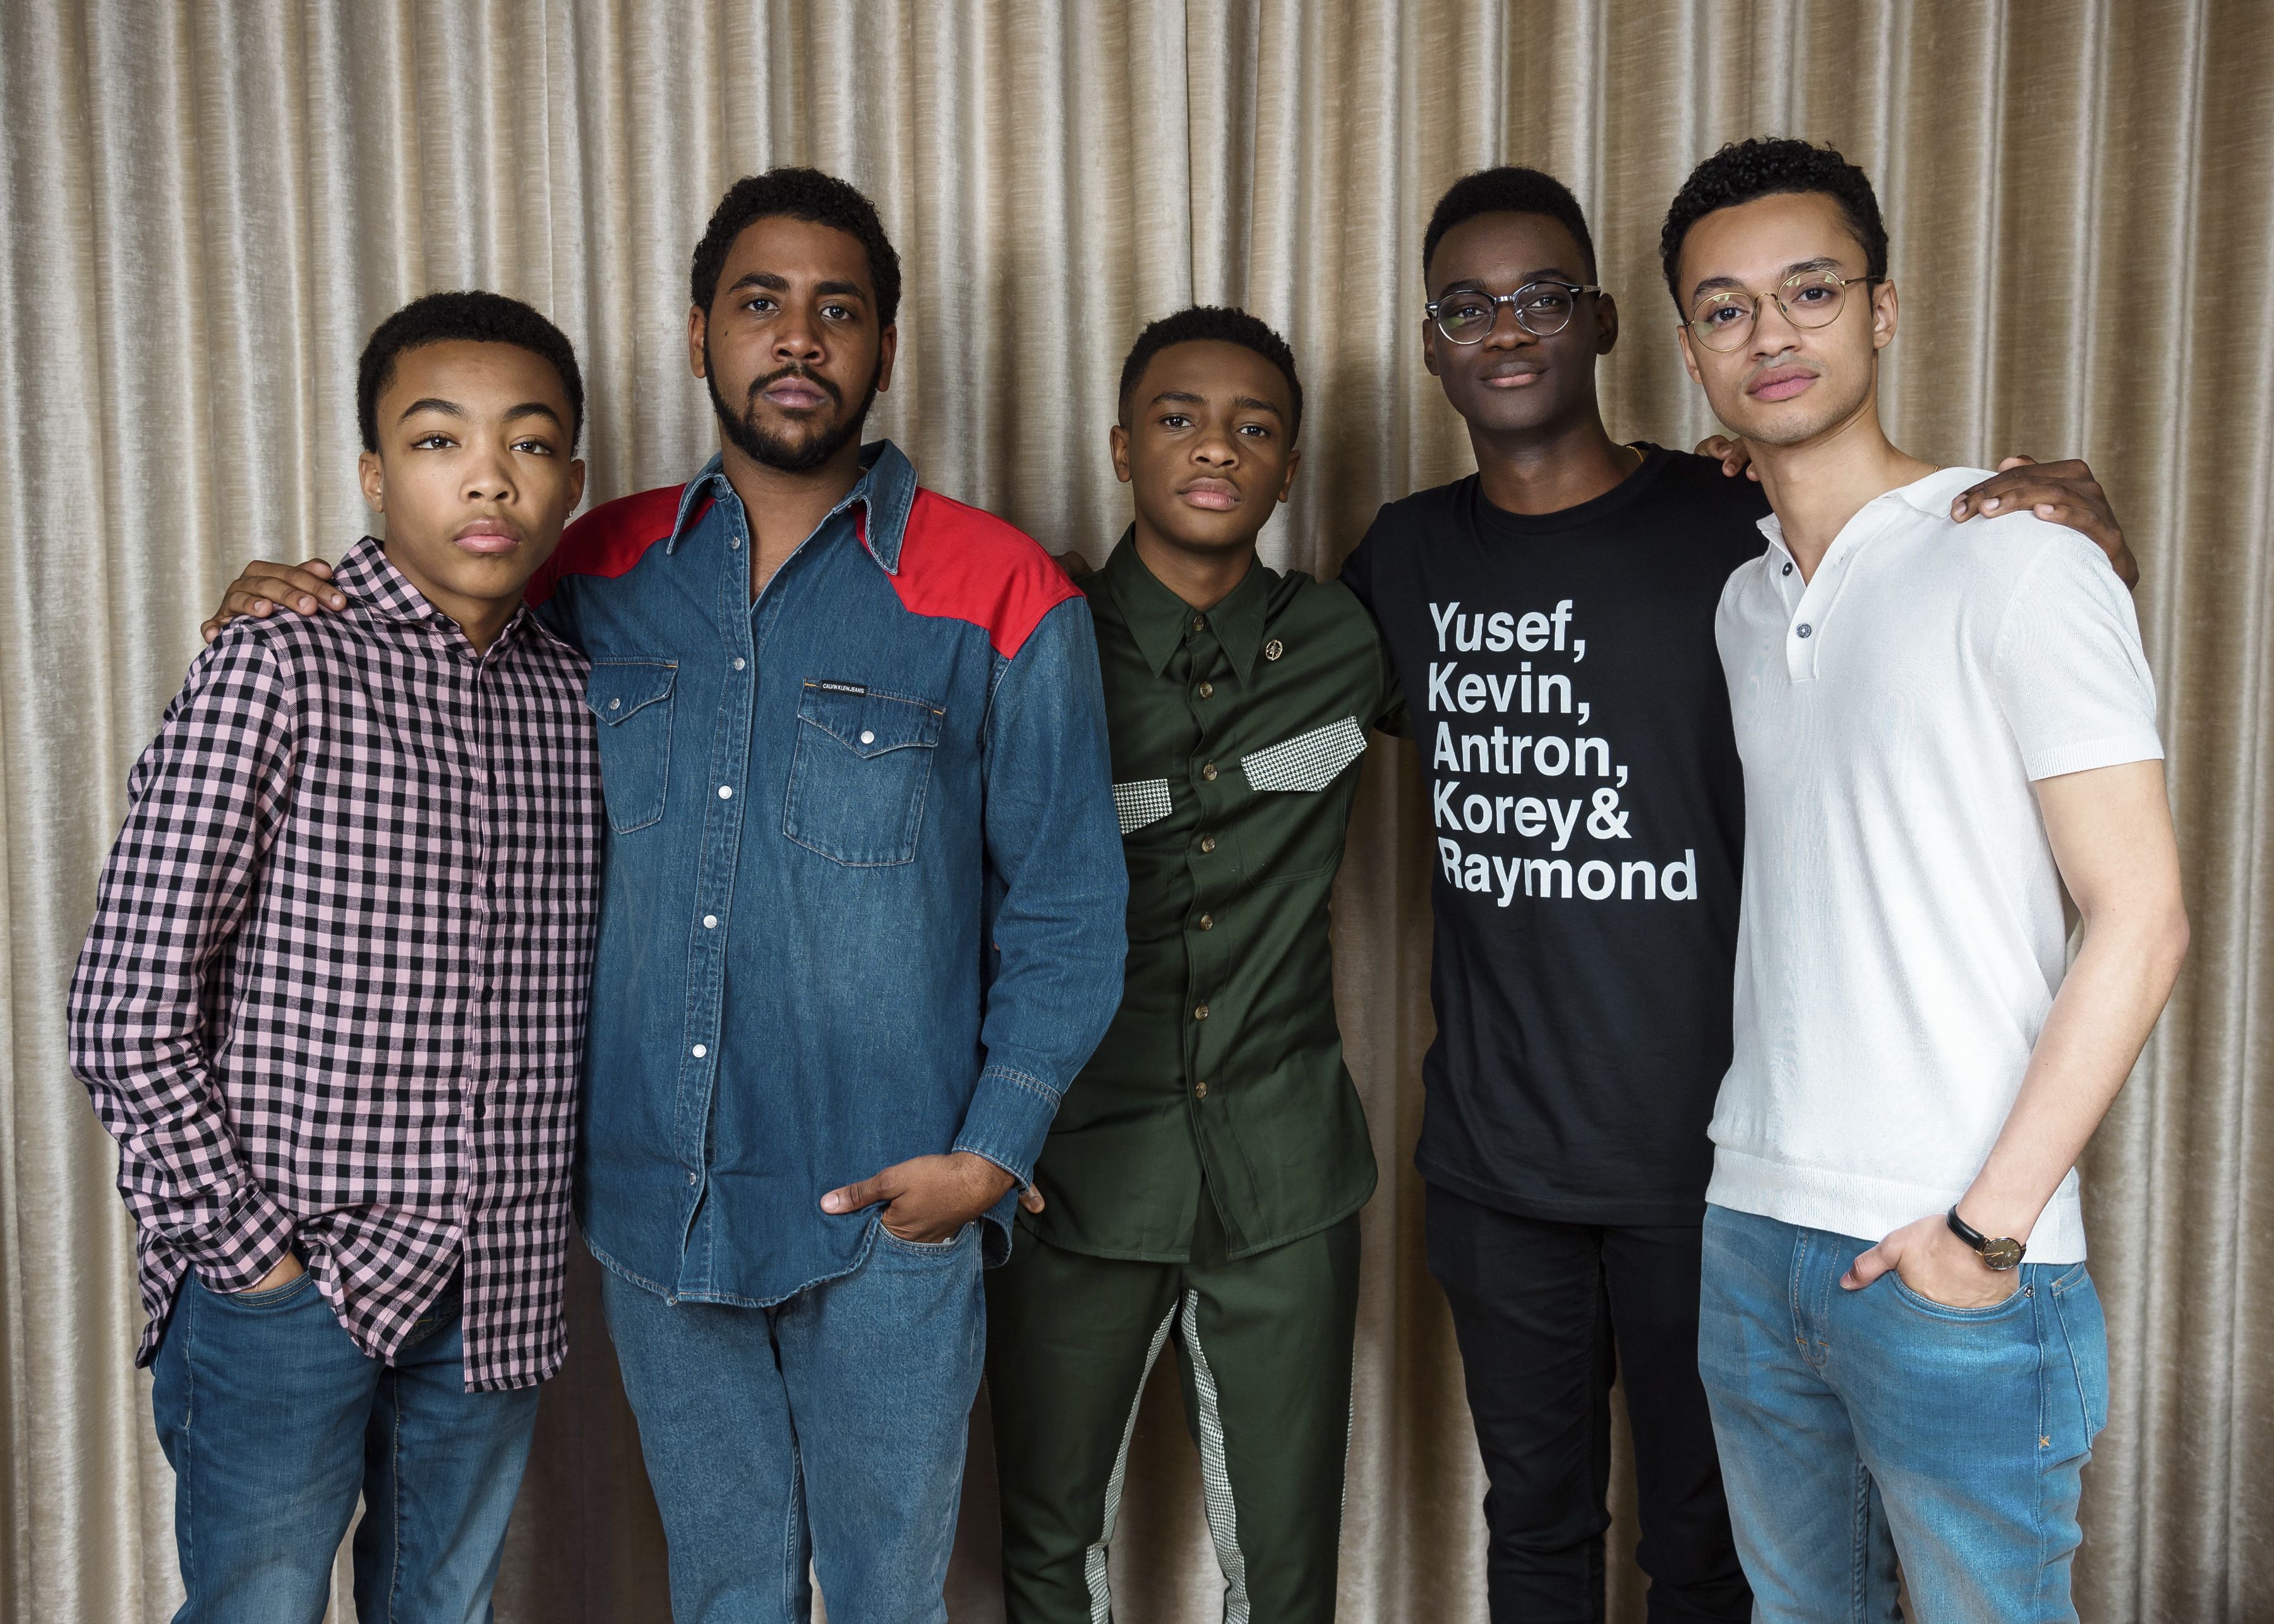 Cast of ‘When They See Us’ Talks about Their Experience While Filming